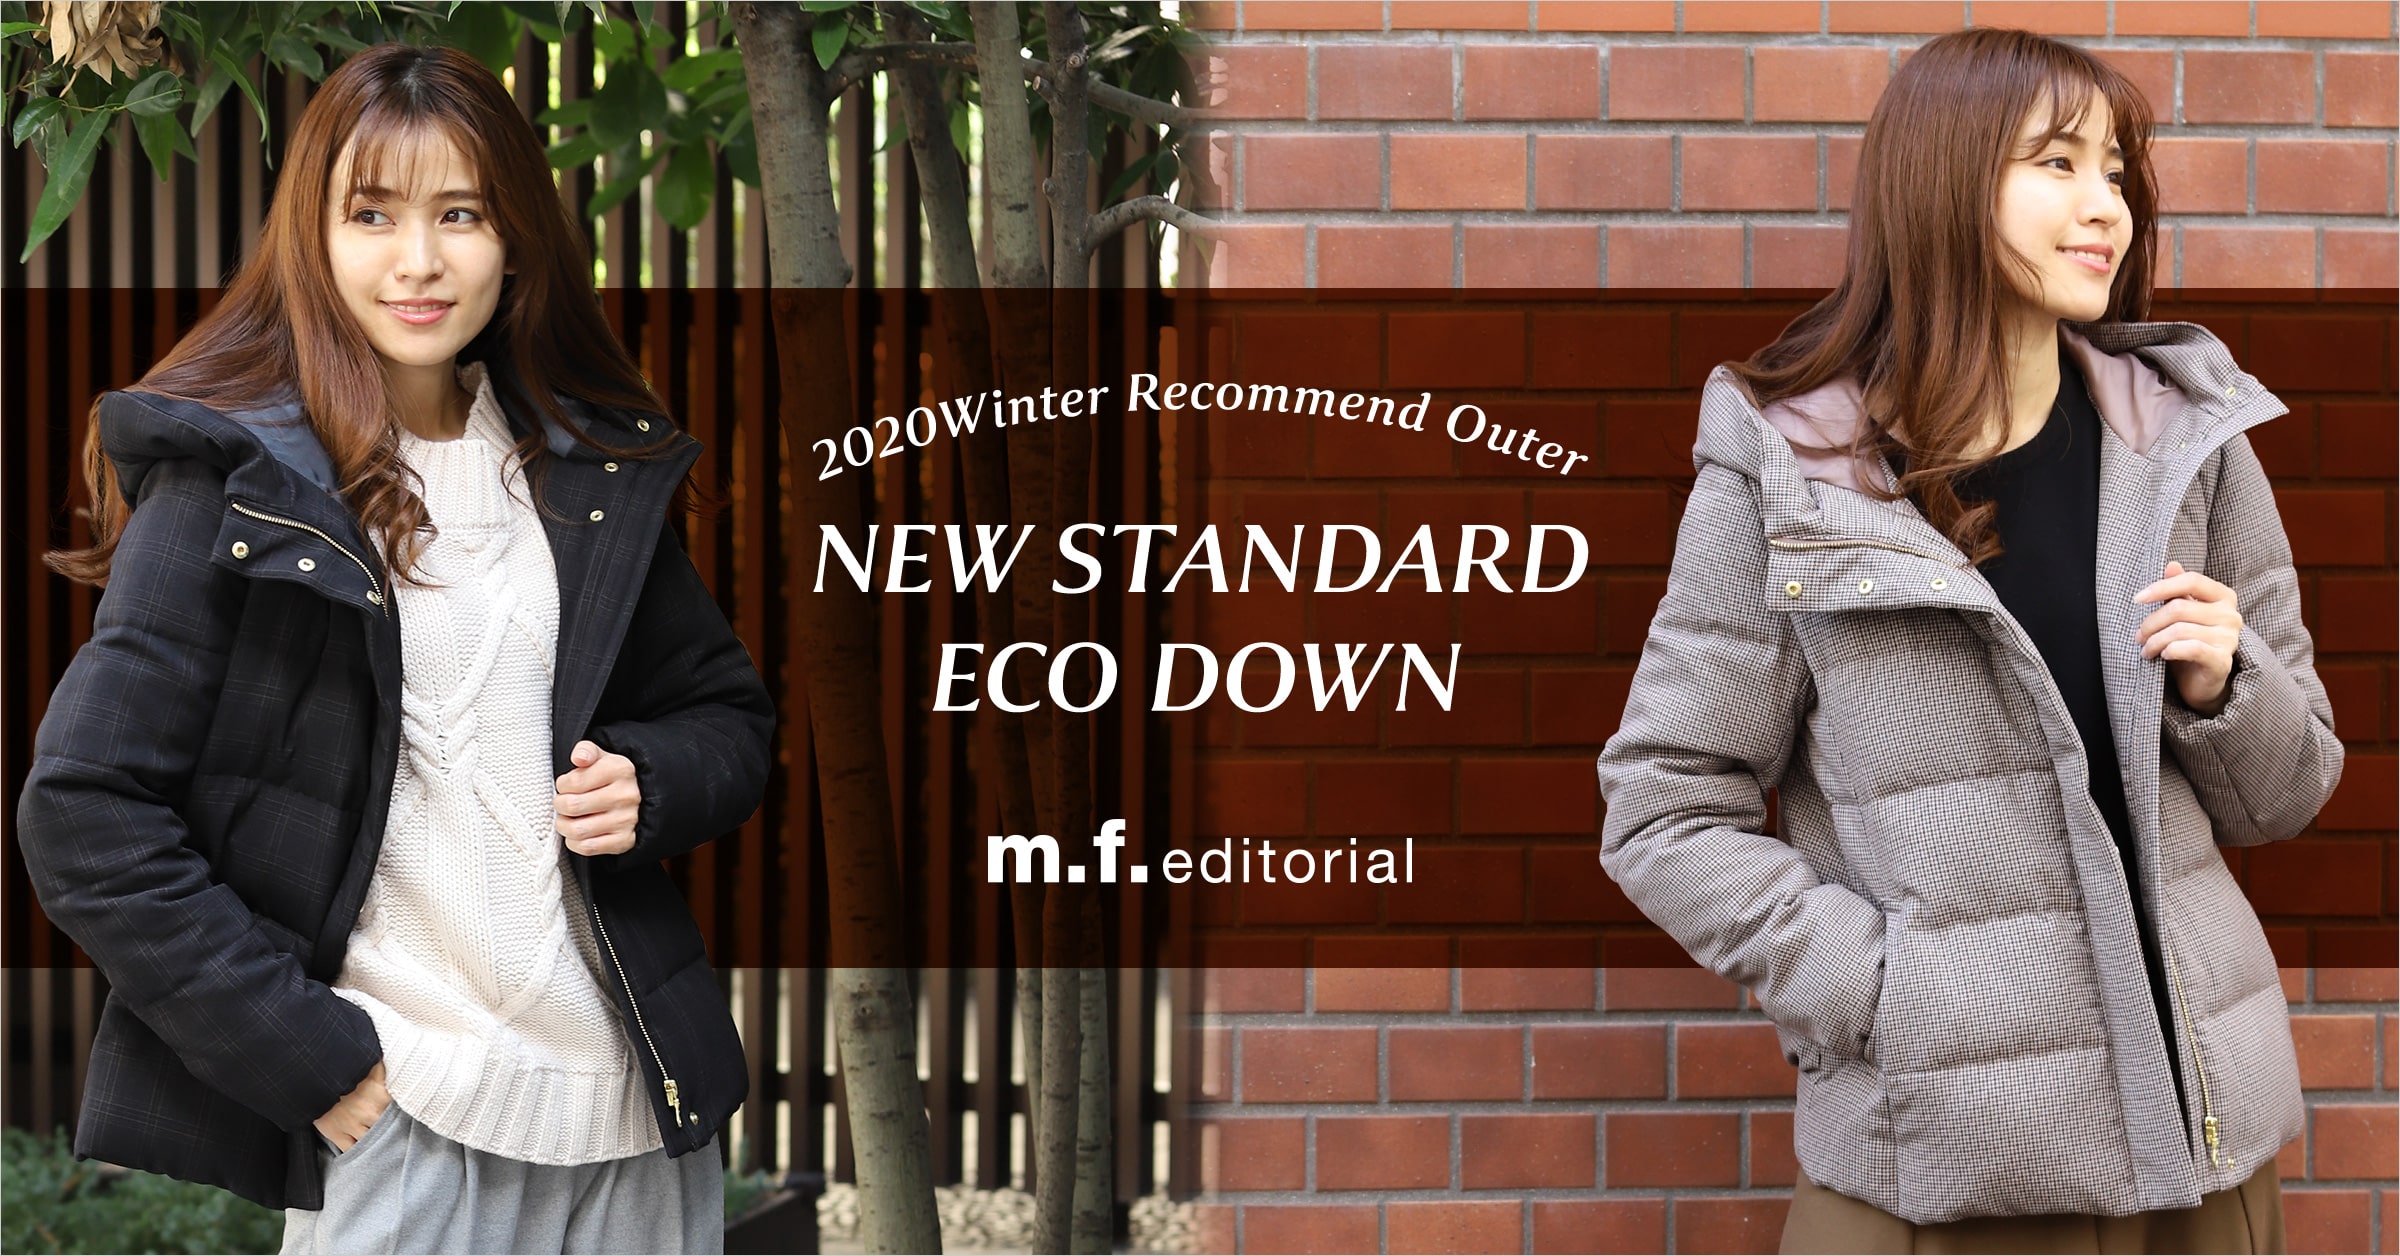 NEW STANDARD ECO DOWN -2020 Winter Recommend Outer-